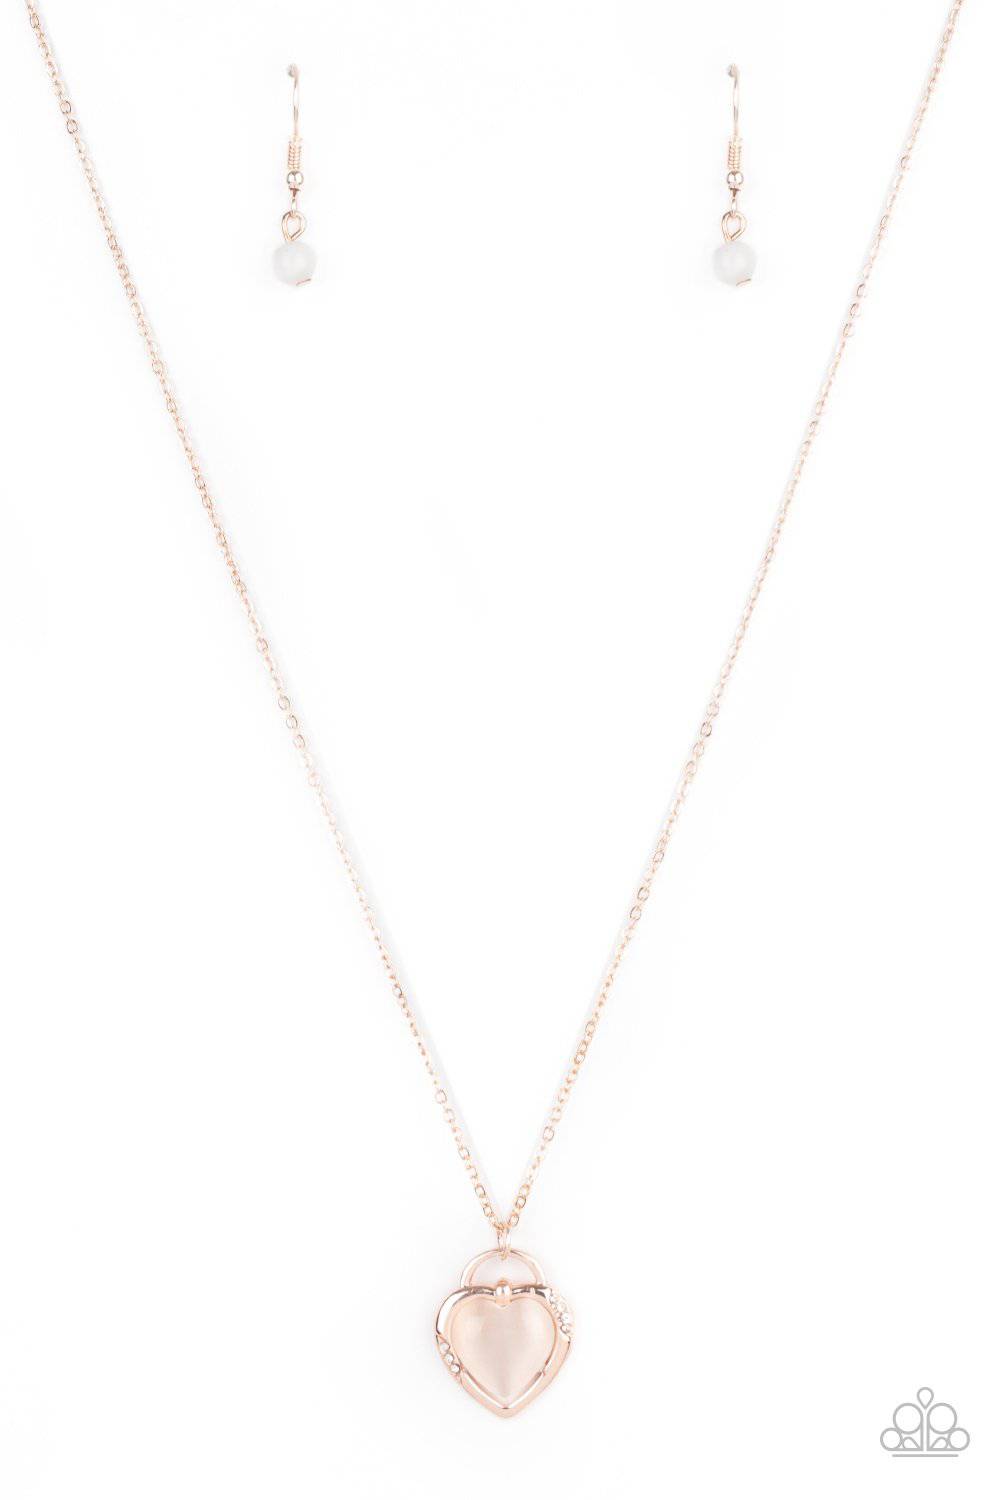 A Dream is a Wish Your Heart Makes - Rose Gold Cat's Eye Necklace - Paparazzi - GlaMarous Titi Jewels